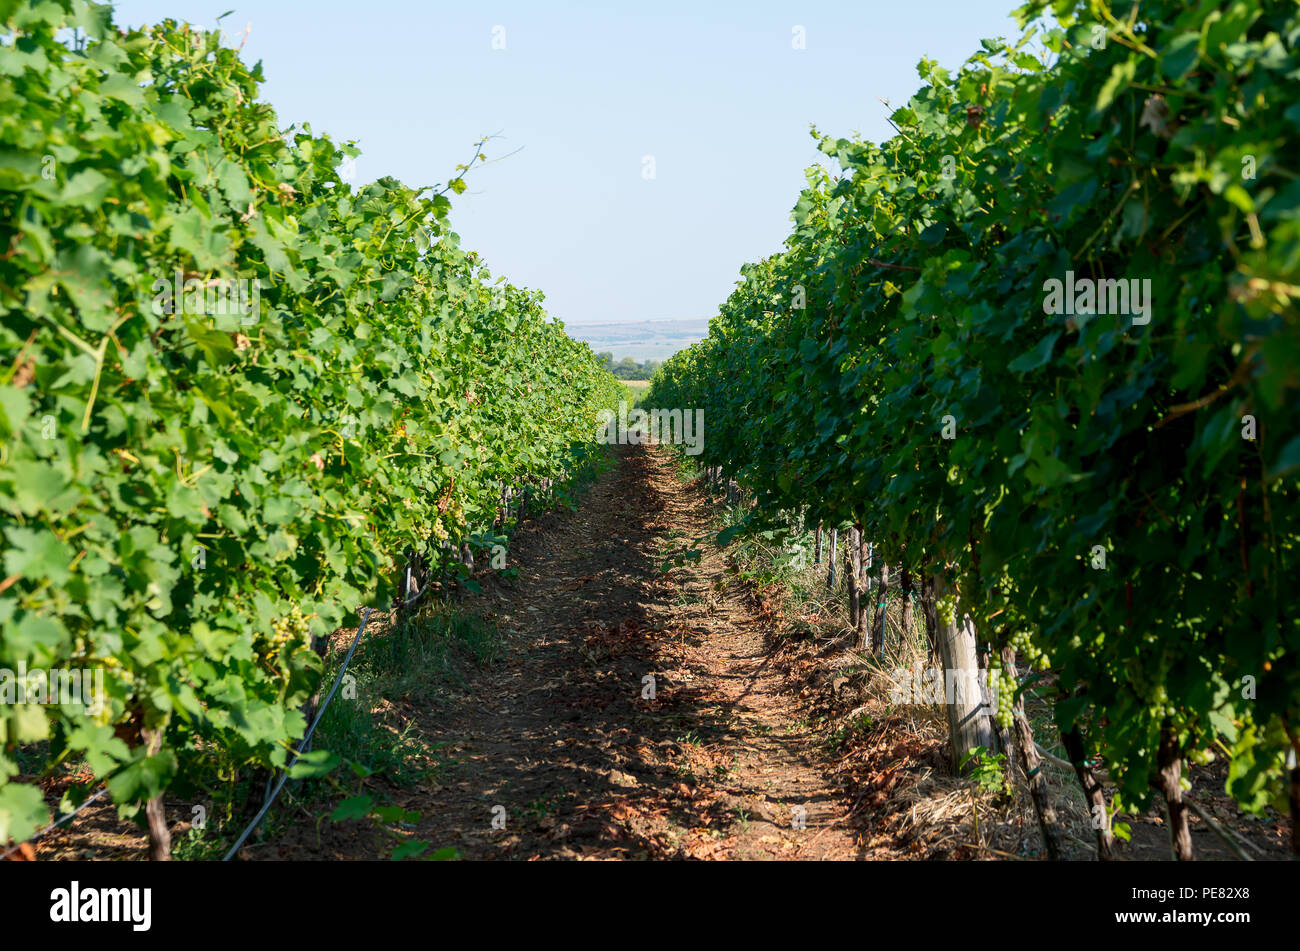 Viticulture. Vineyards rows. Stock Photo